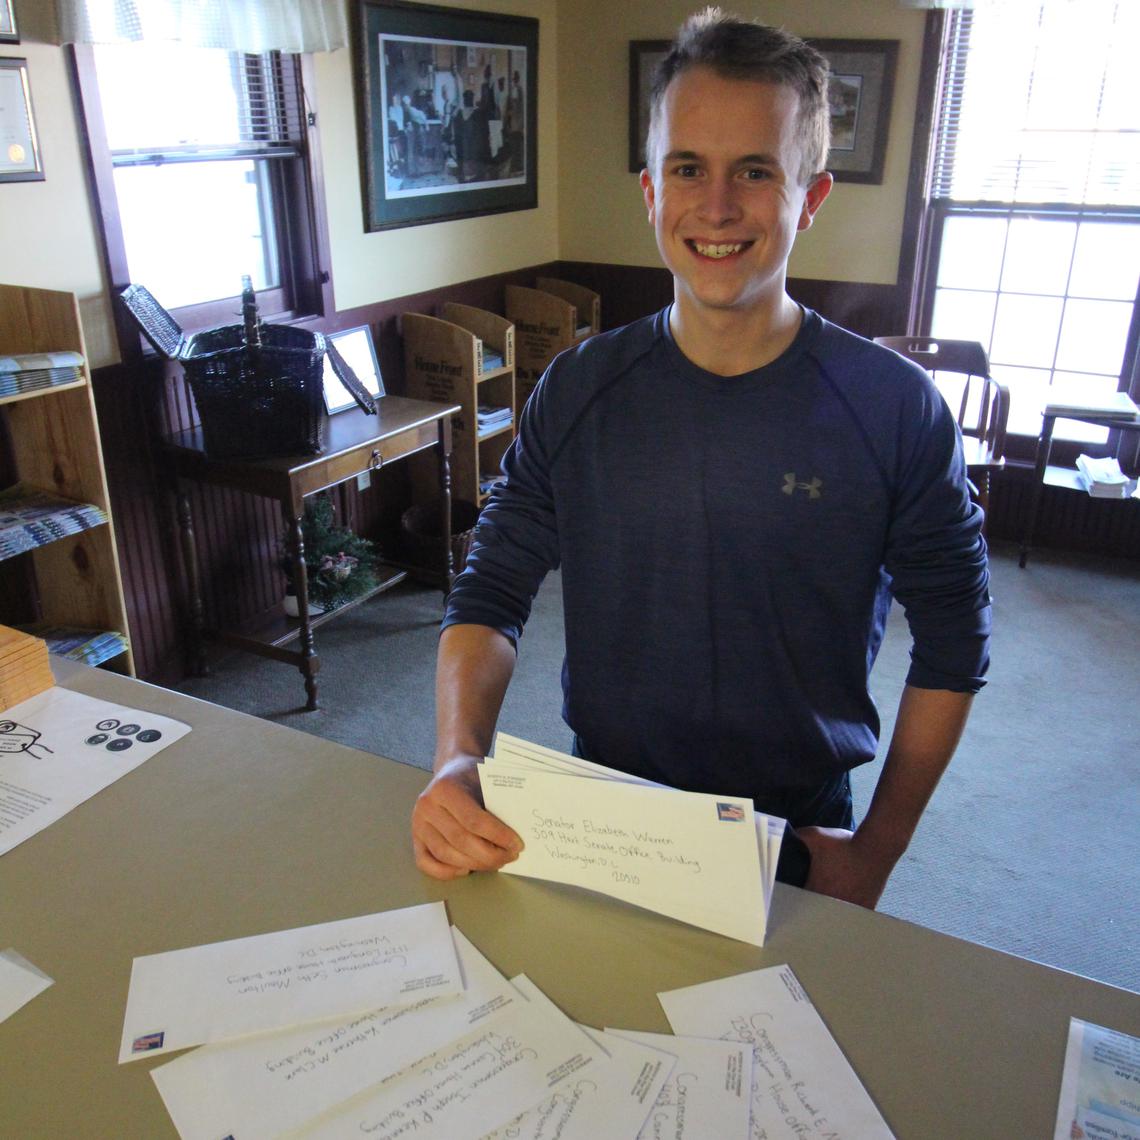 Jackson Purfeerst, of Crosslake, is challenging federal politicians to respond to him, an average American. Travis Grimler / Forum News Service